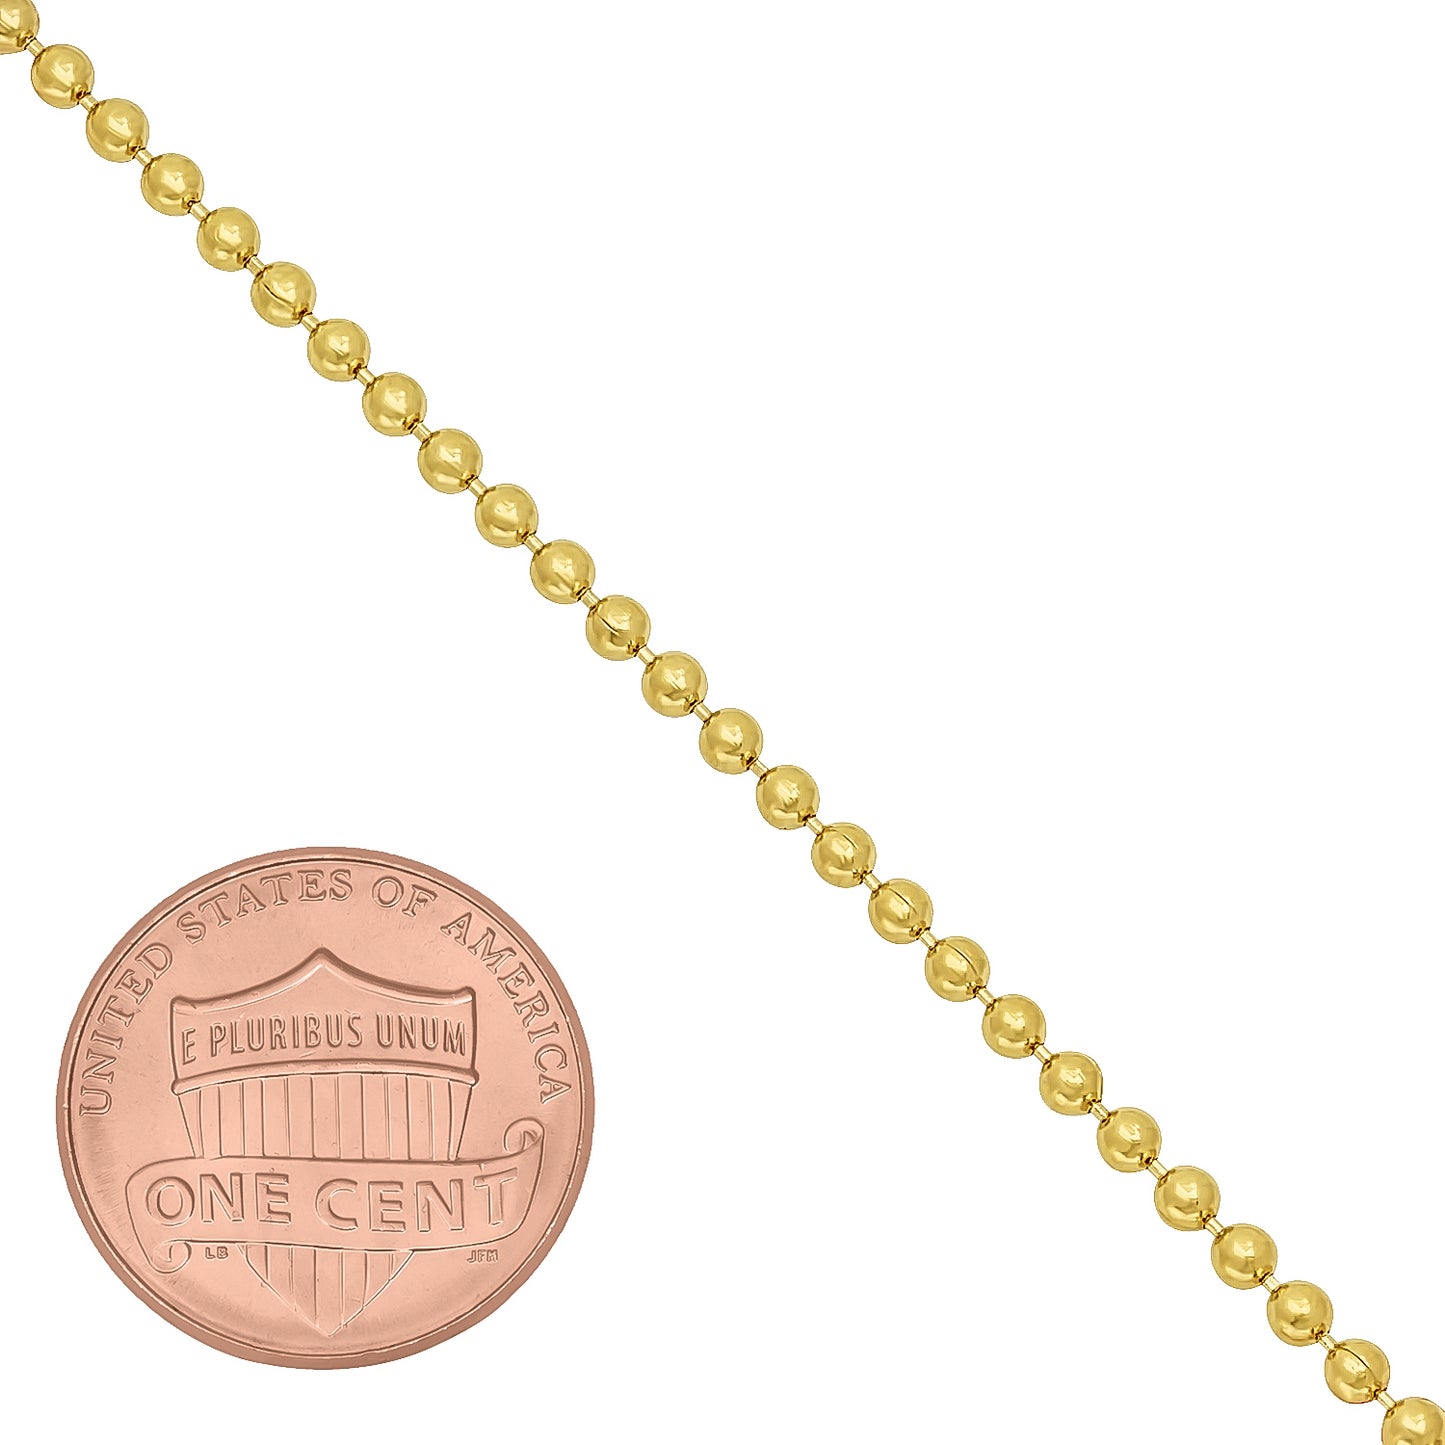 1mm-6mm 14k Yellow Gold Plated Ball Military Chain Necklace or Bracelet (SKU: GL-BALL-CHAINS)